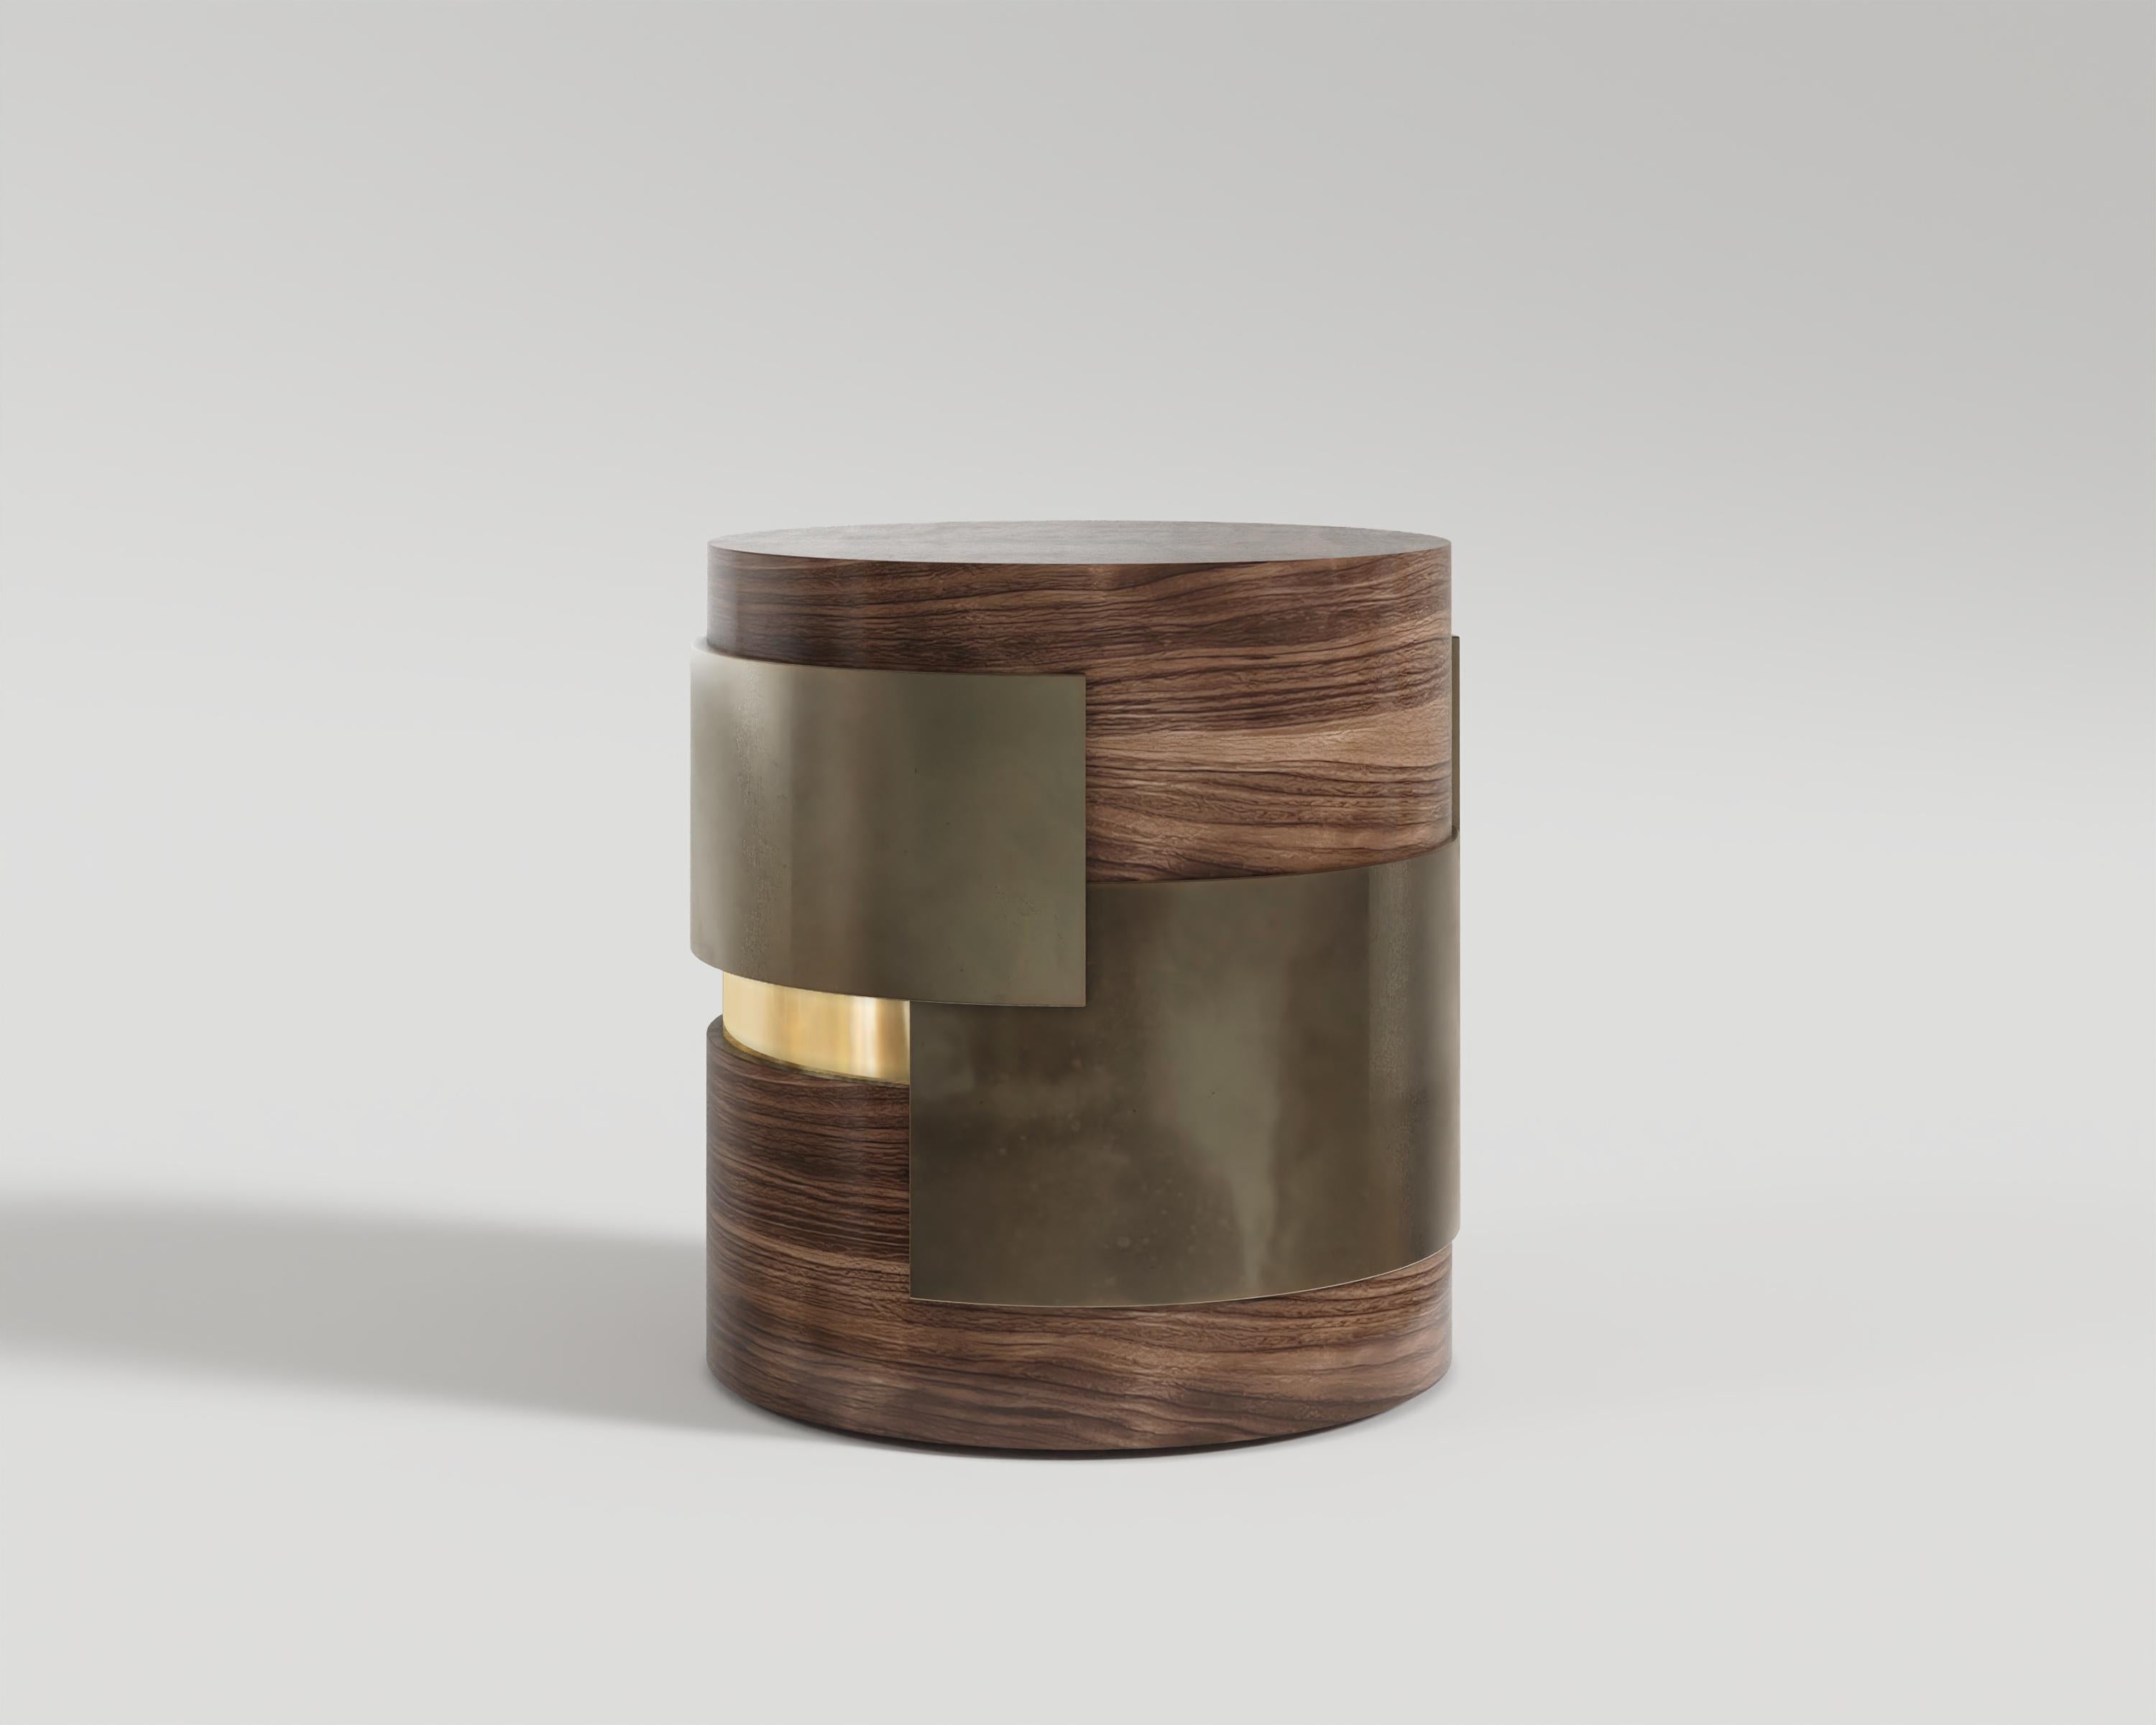 Fragmin Side Table
Elegant luxury Fragmin side table featuring a sleek cylindrical design, crafted with black lacquer, bronze accents, and rich veneer materials for a timeless and opulent aesthetic.

Materials and sizes are customizable upon the